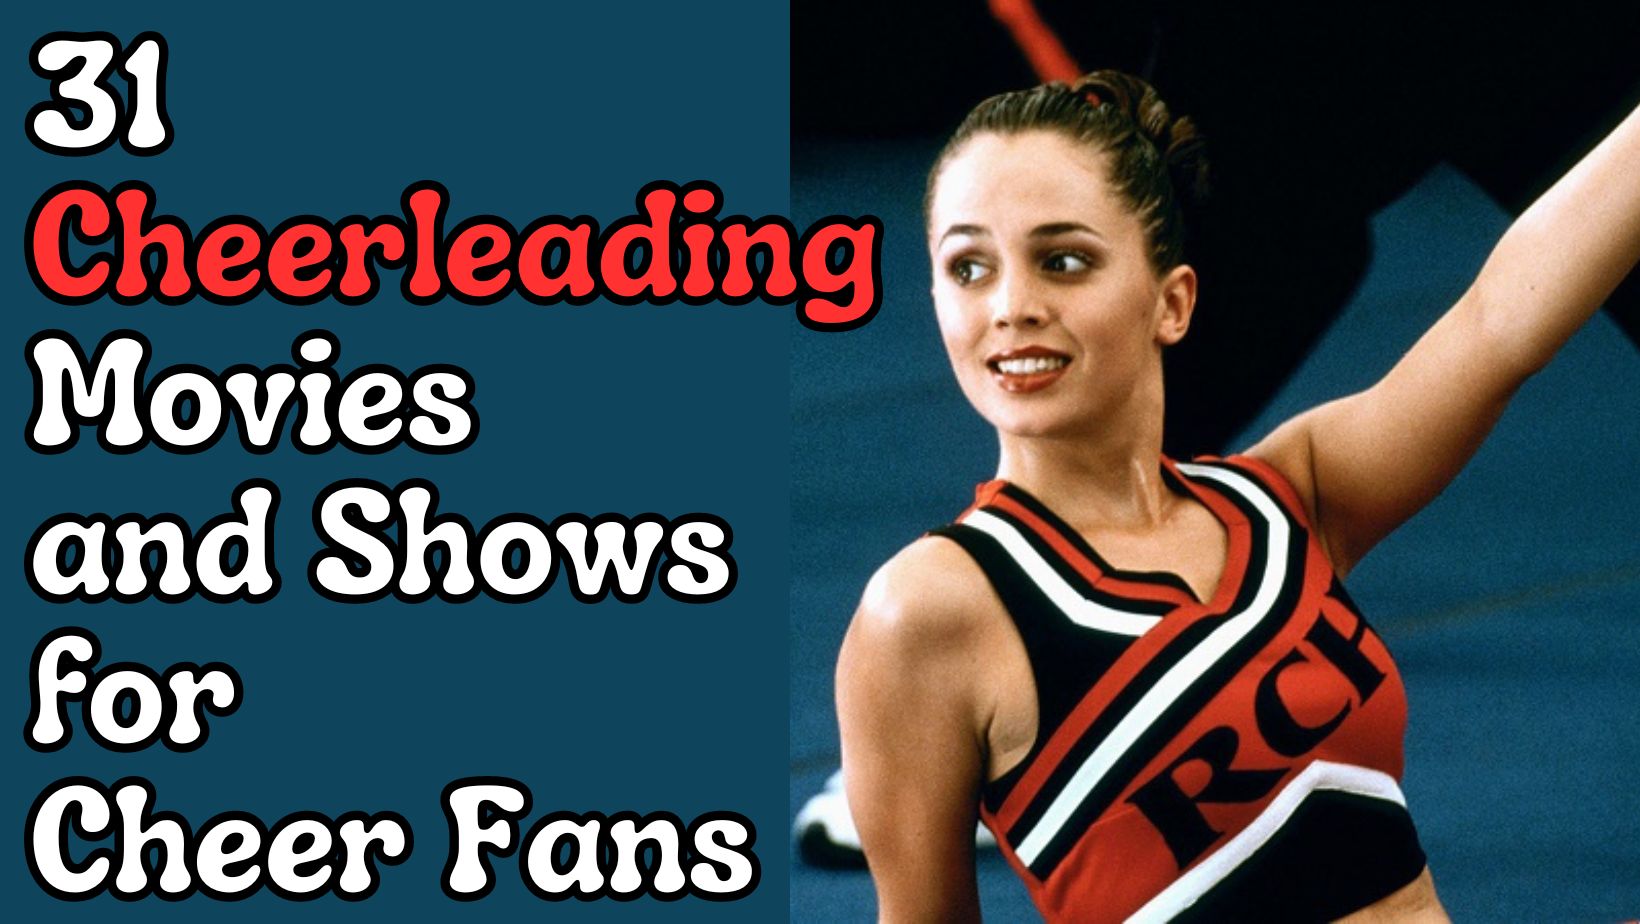 image of eliza dushku from the movie "bring it on". text "31 cheerleading movies and shows for cheer fans"